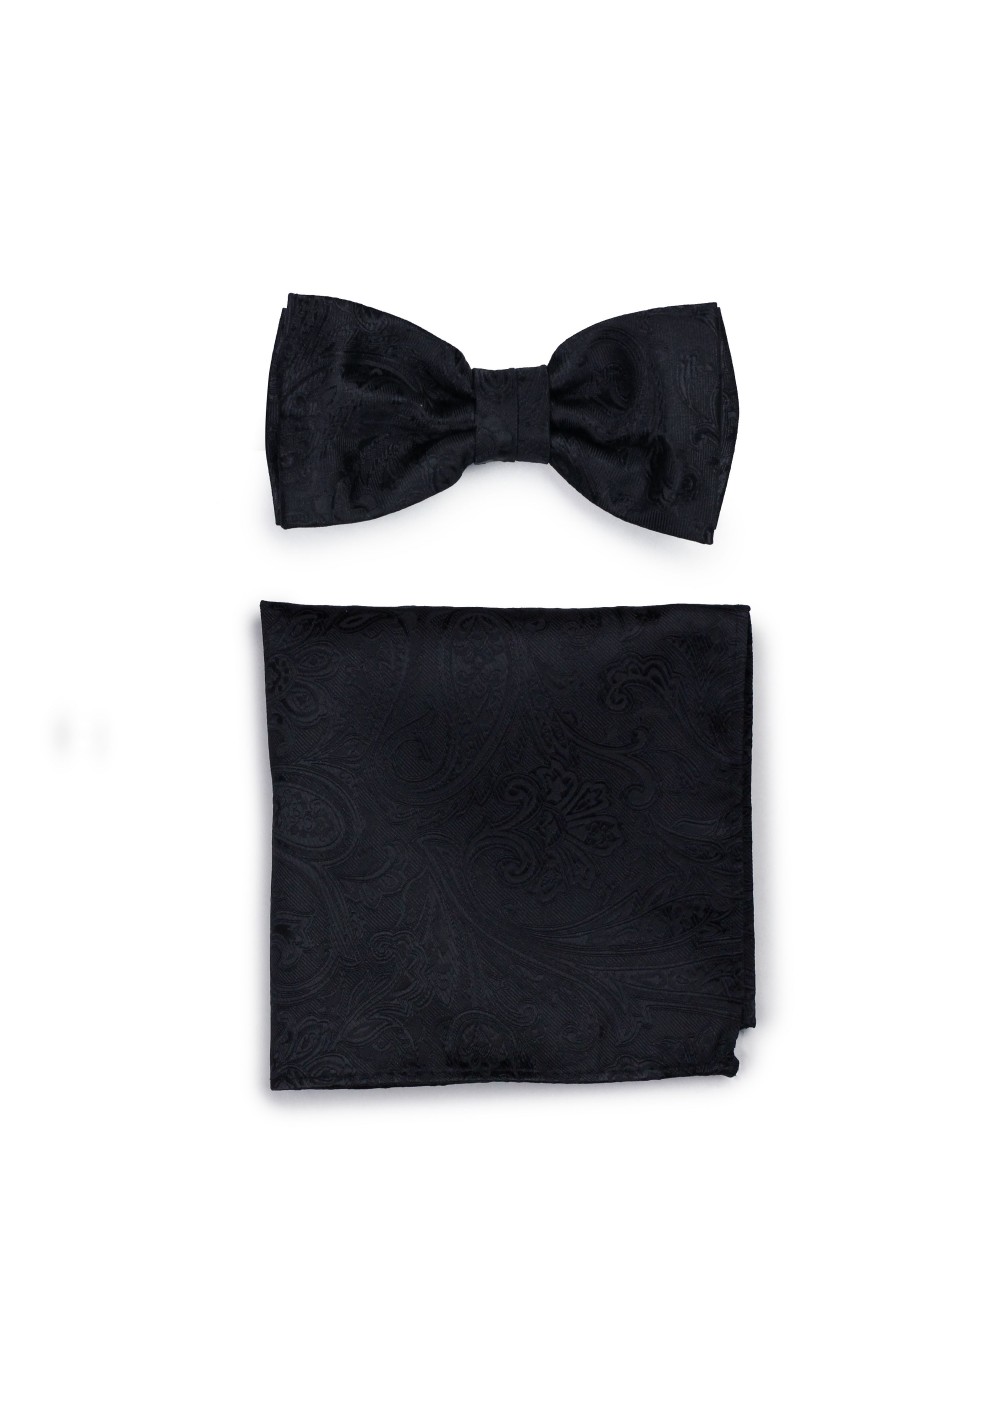 Paisley Mens Bow Tie and Pocket Square Set in Black